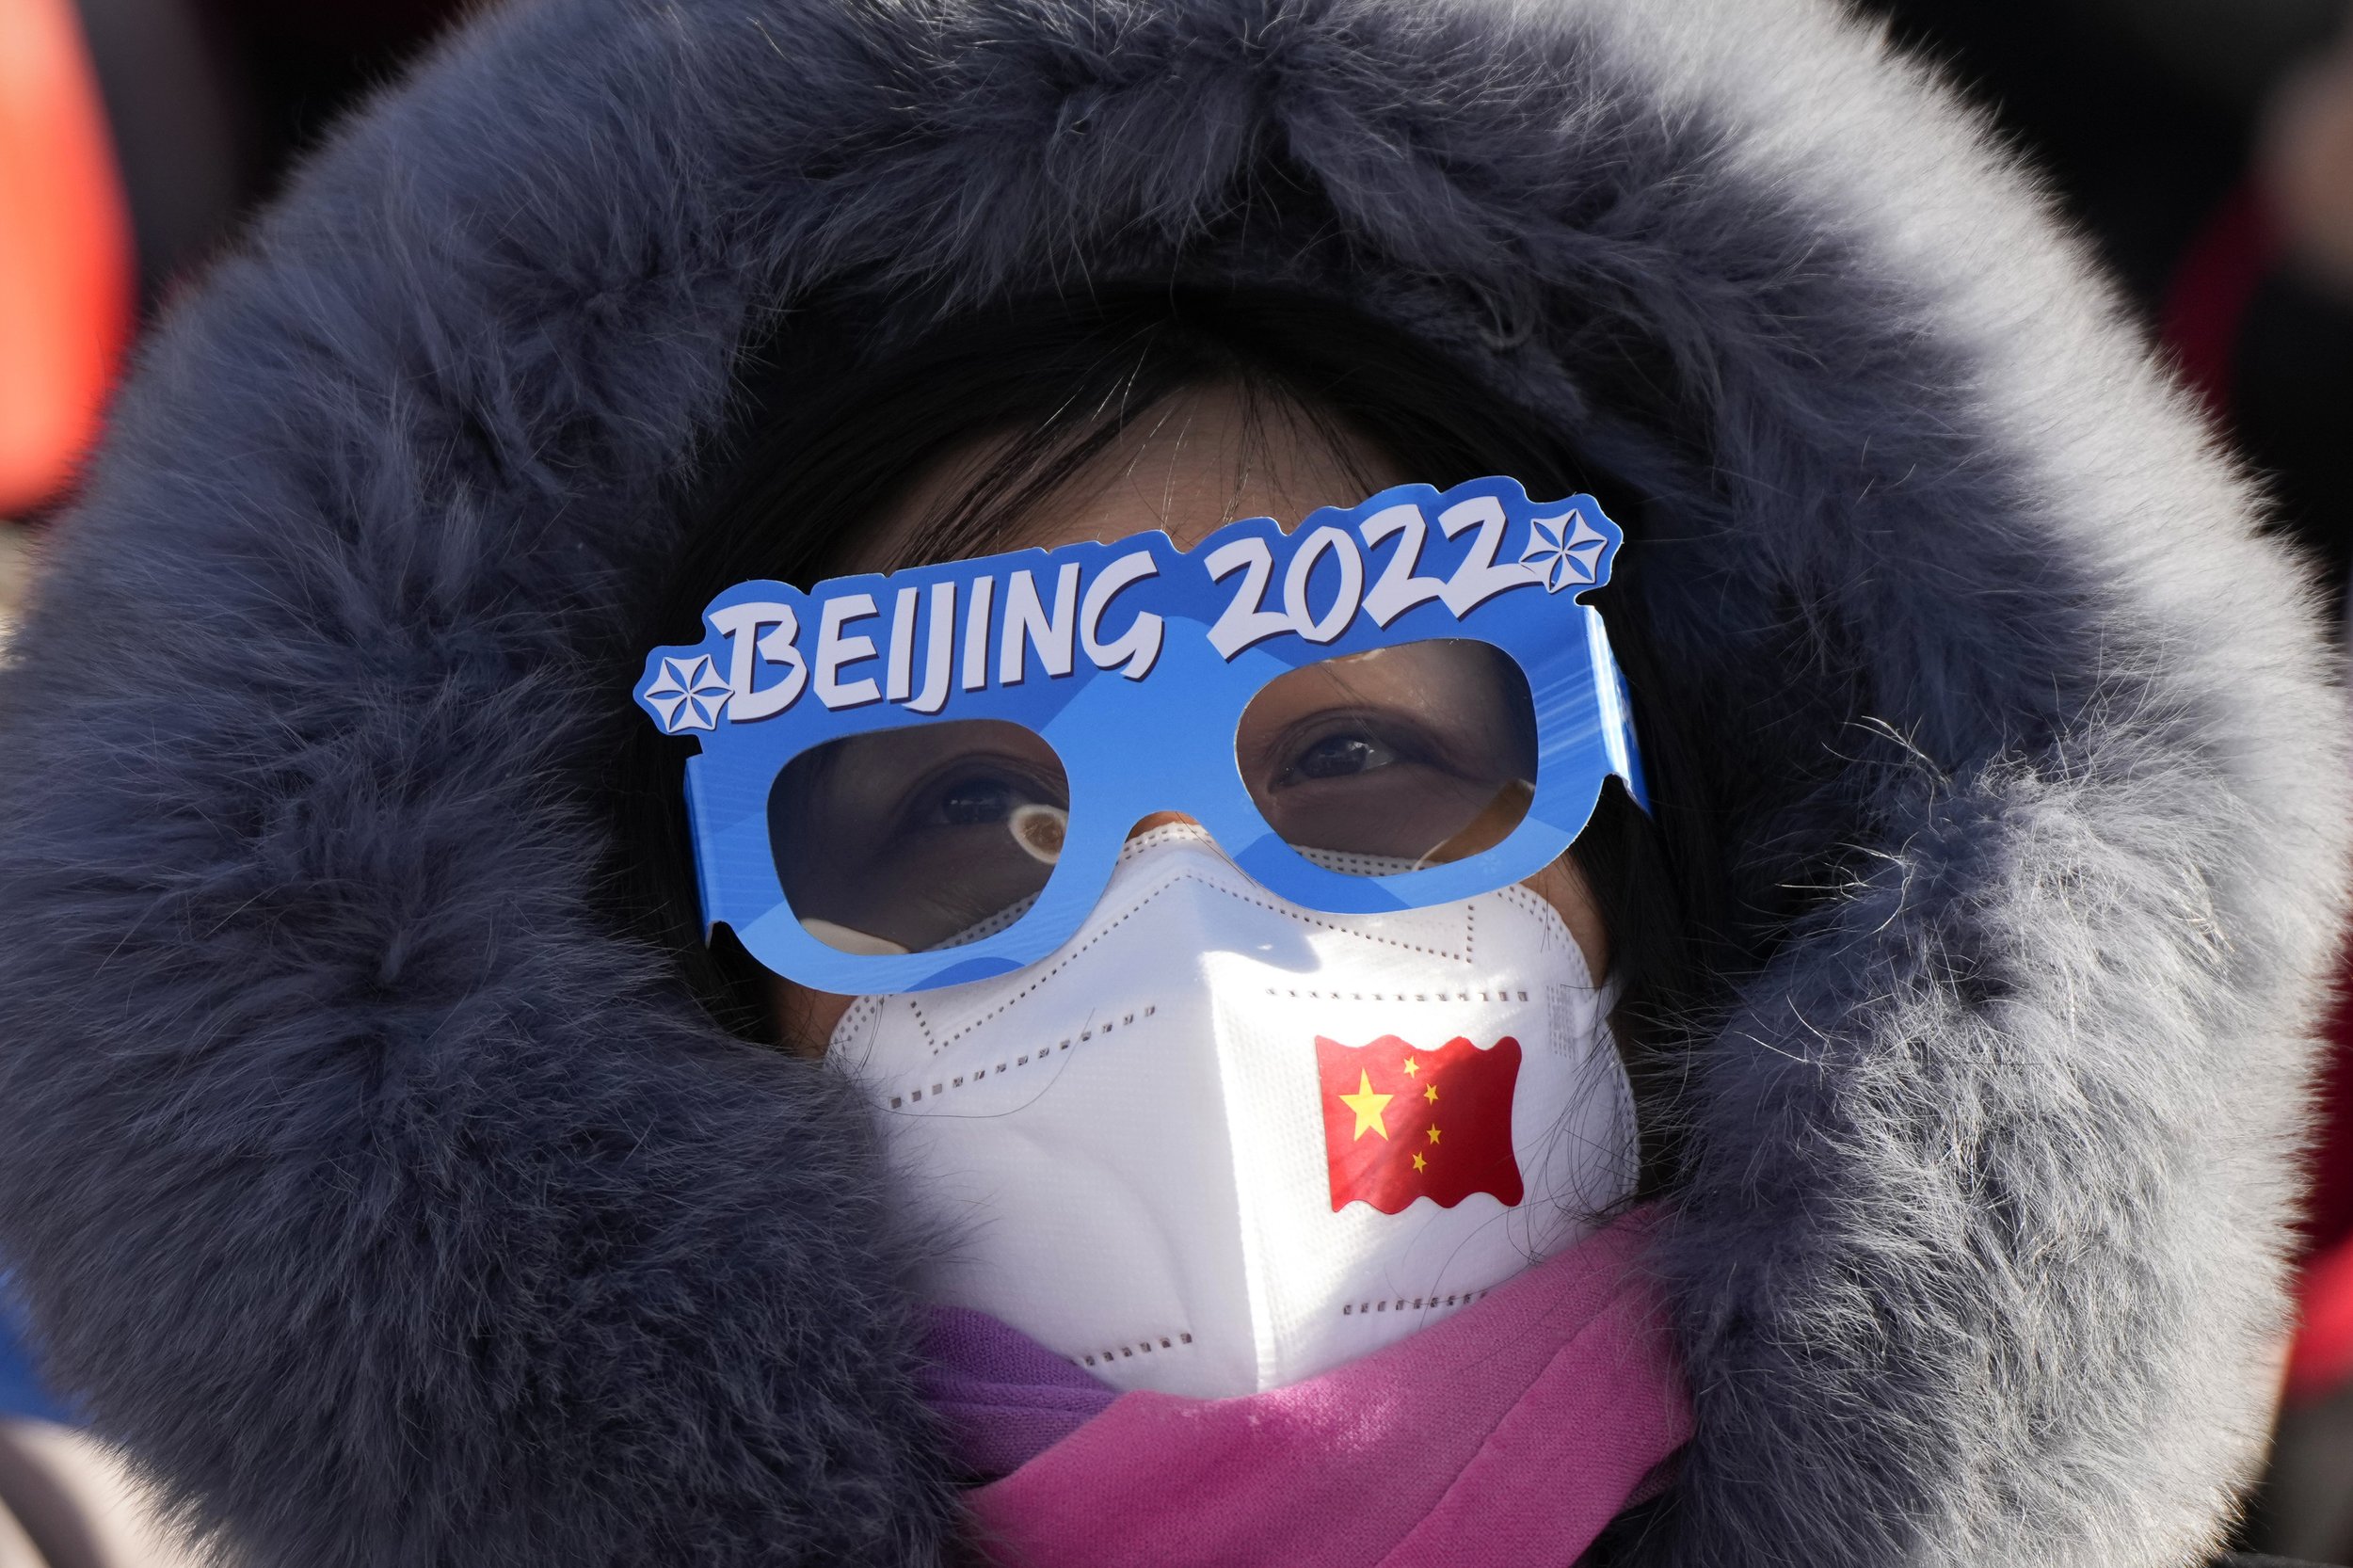  A spectator watching the women's parallel giant slalom qualification run at the 2022 Winter Olympics, Tuesday, Feb. 8, 2022, in Zhangjiakou, China. (AP Photo/Francisco Seco) 